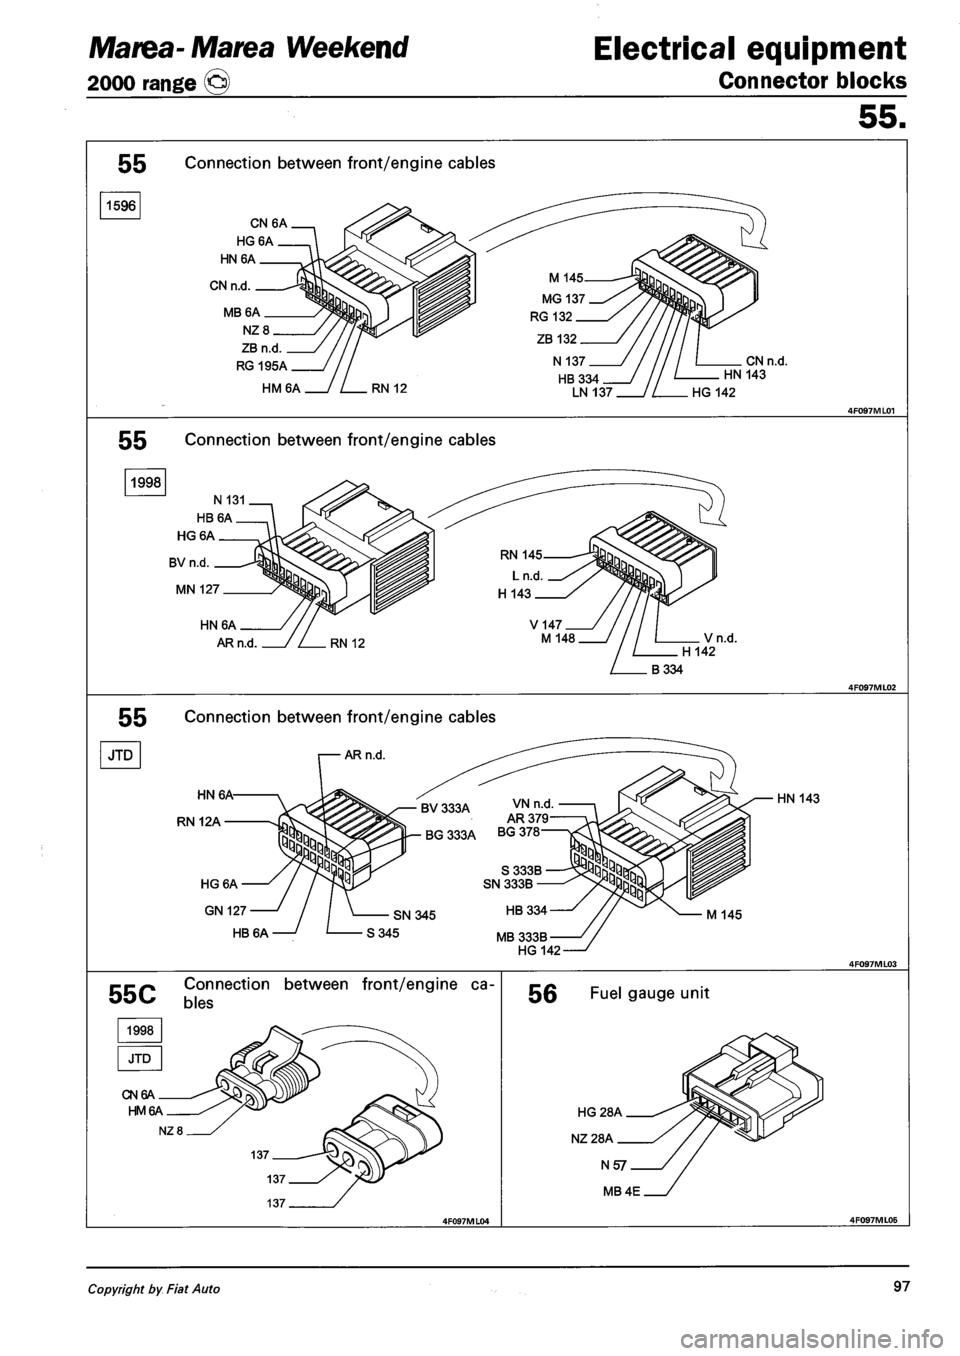 FIAT MAREA 2001 1.G Workshop Manual Marea- Marea Weekend 
2000 range © 
Electrical equipment 
Connector blocks 
55. 
55 Connection between front/engine cables 
1596 
CN 6A 
HG6A 
HN6A 
CN n.d. 
MB6A 
NZ 8 
ZB n.d 
RG 195A 
HM6A 
CN n.d